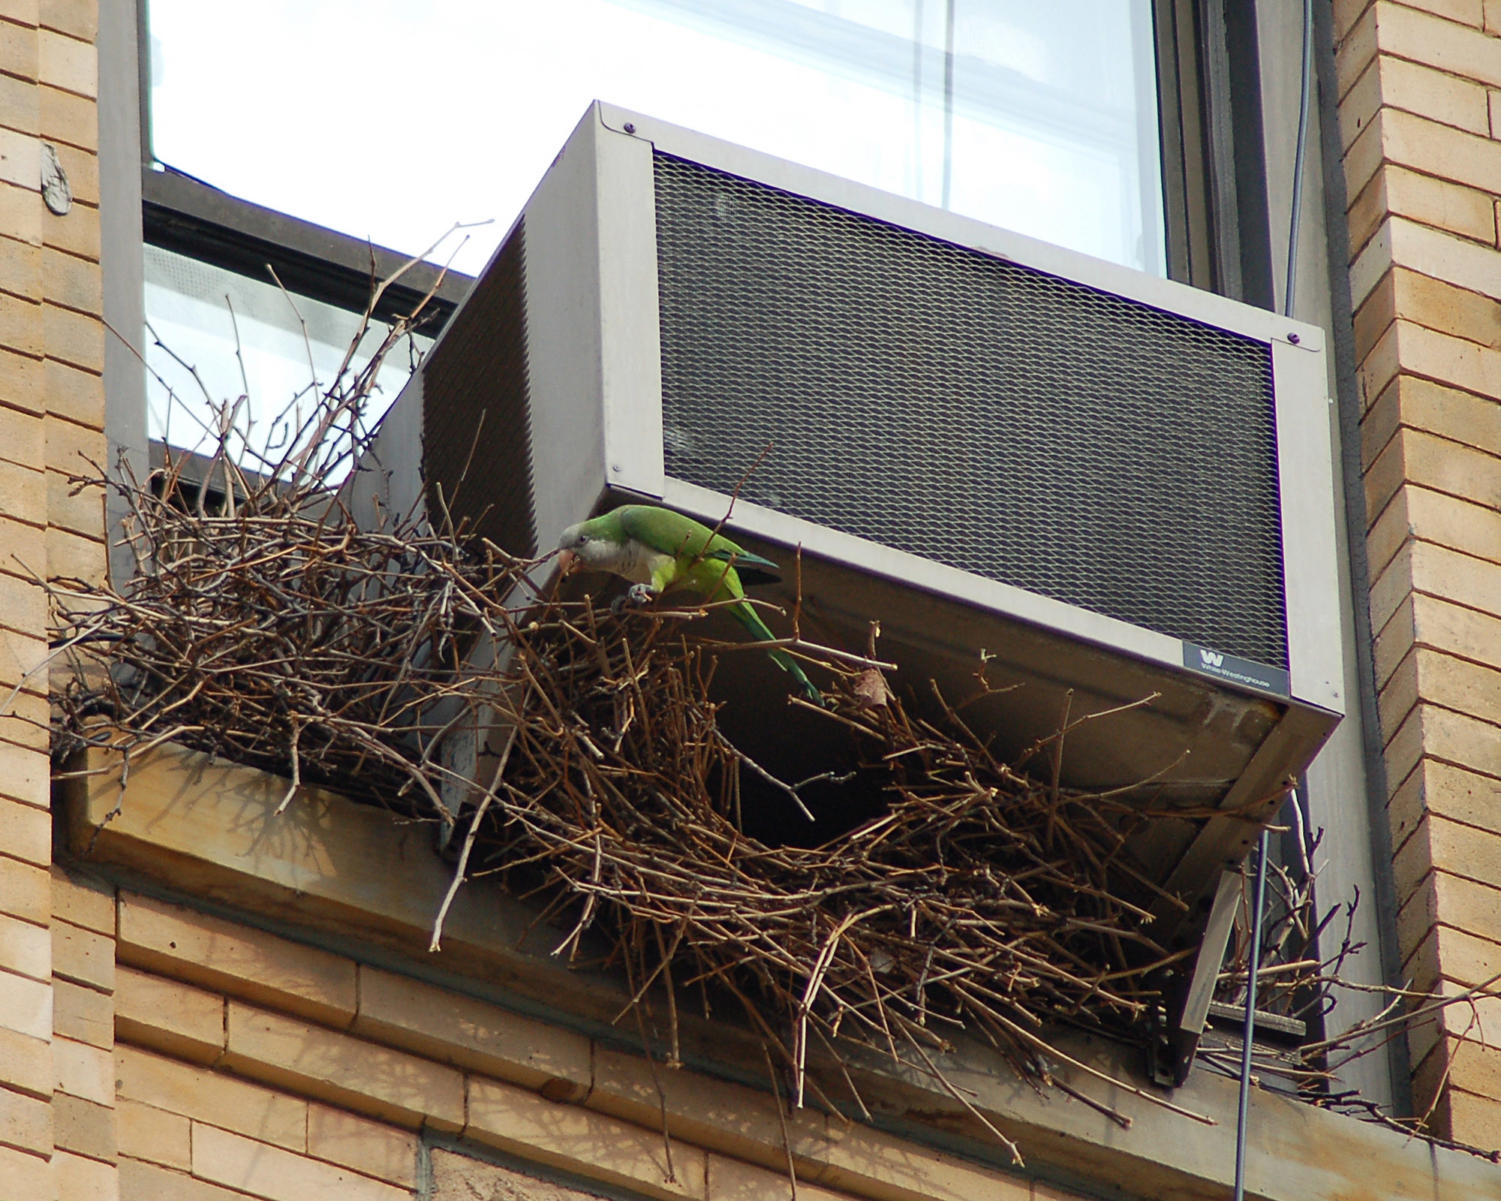 Monk parakeets colonize an unsuspecting air conditioning unit in Manhattan.